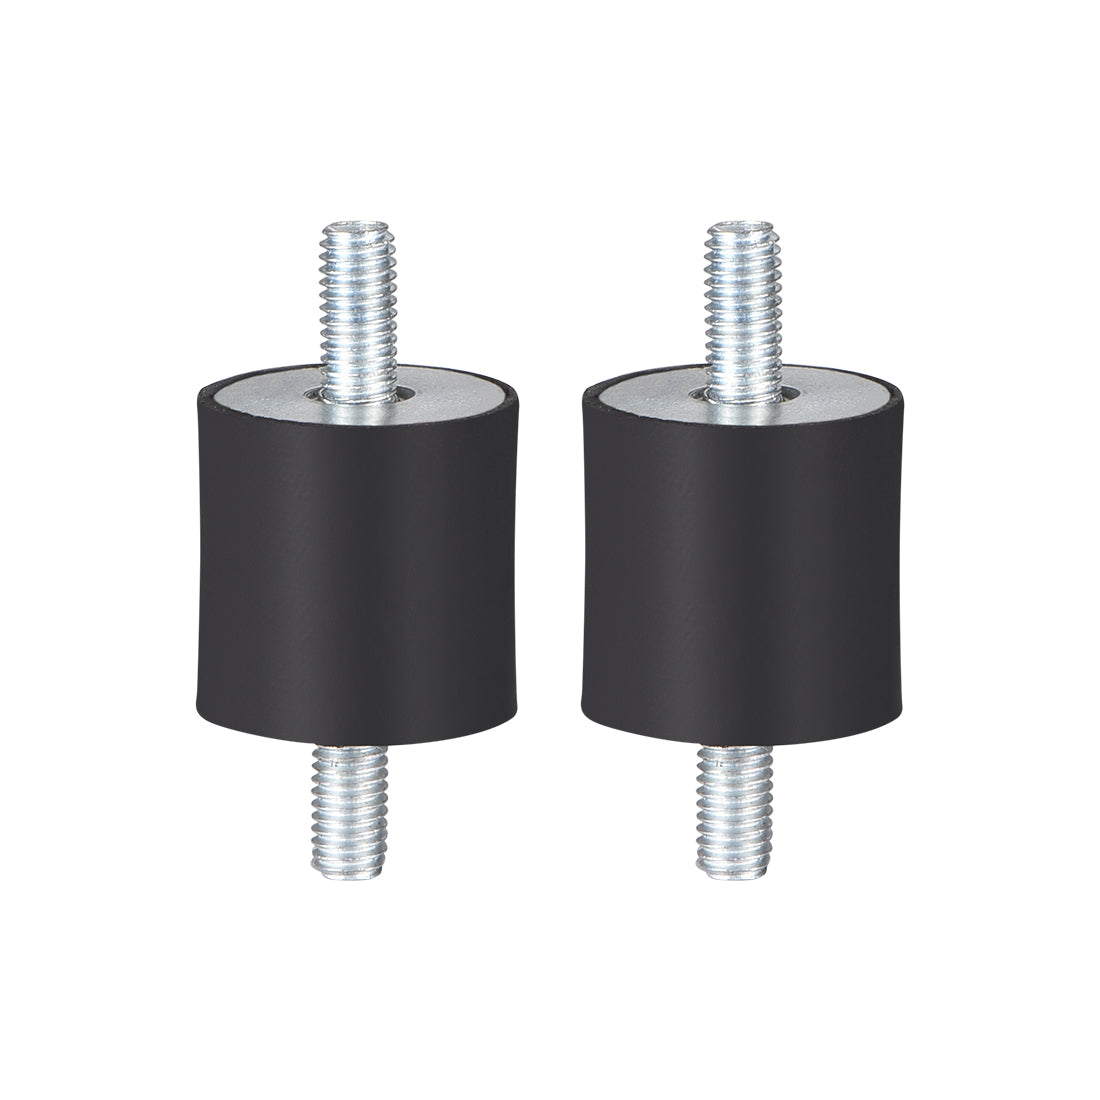 uxcell Uxcell Rubber Mounts,Vibration Isolators,with Studs